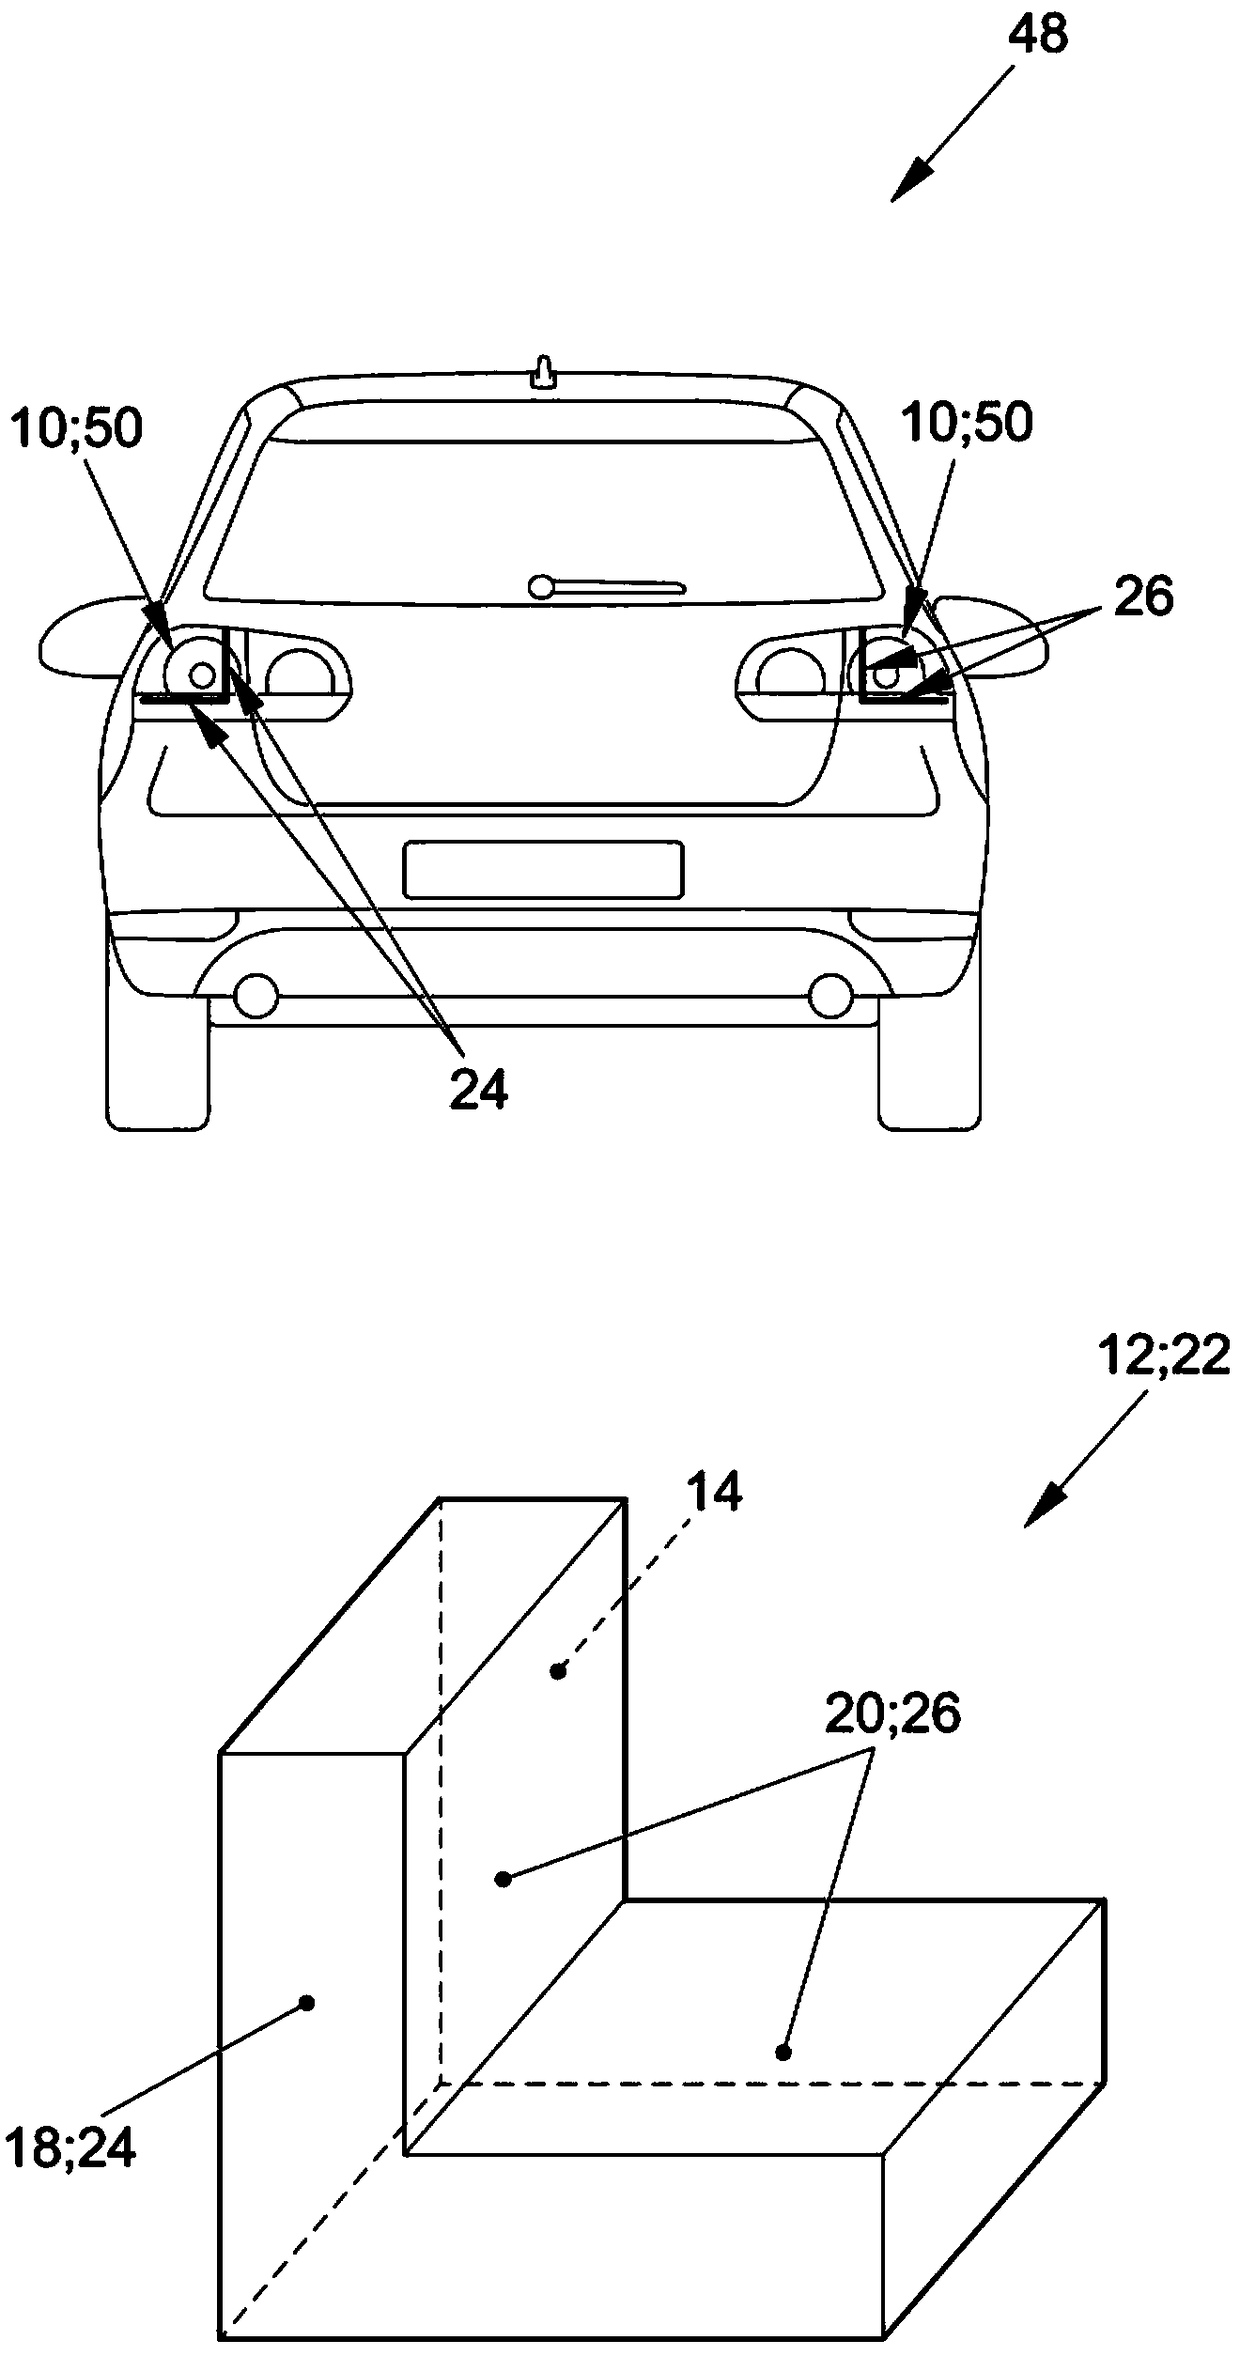 Optical conductor and lighting system for vehicle